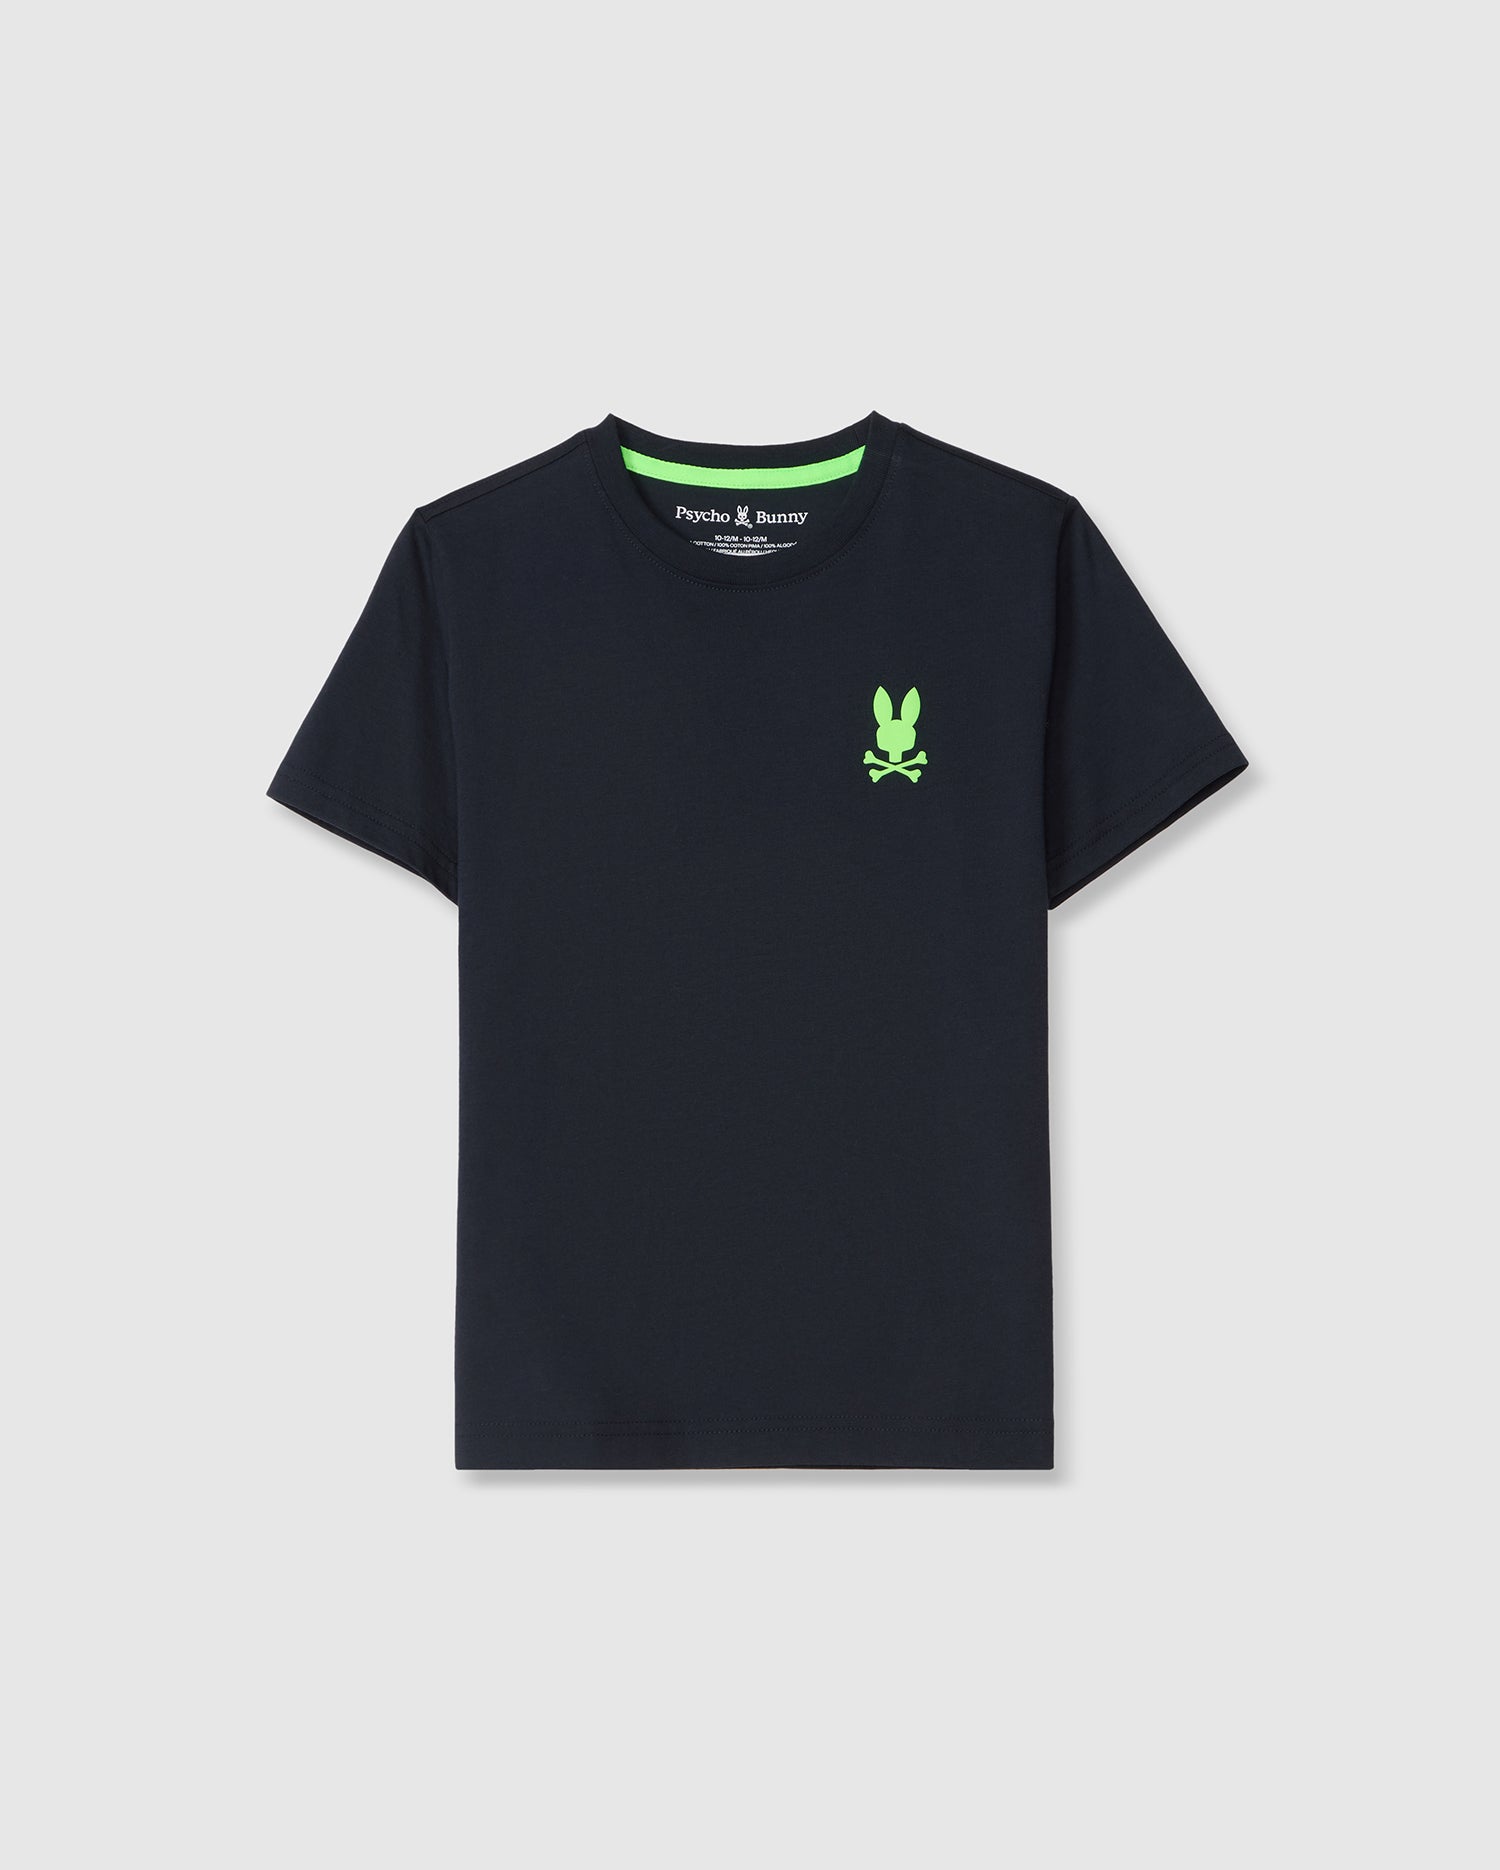 Navy blue Pima cotton KIDS SLOAN BACK GRAPHIC TEE with a small green bunny logo on the left chest and green trim around the inside of the neckline, displayed on a plain background. Brand: Psycho Bunny